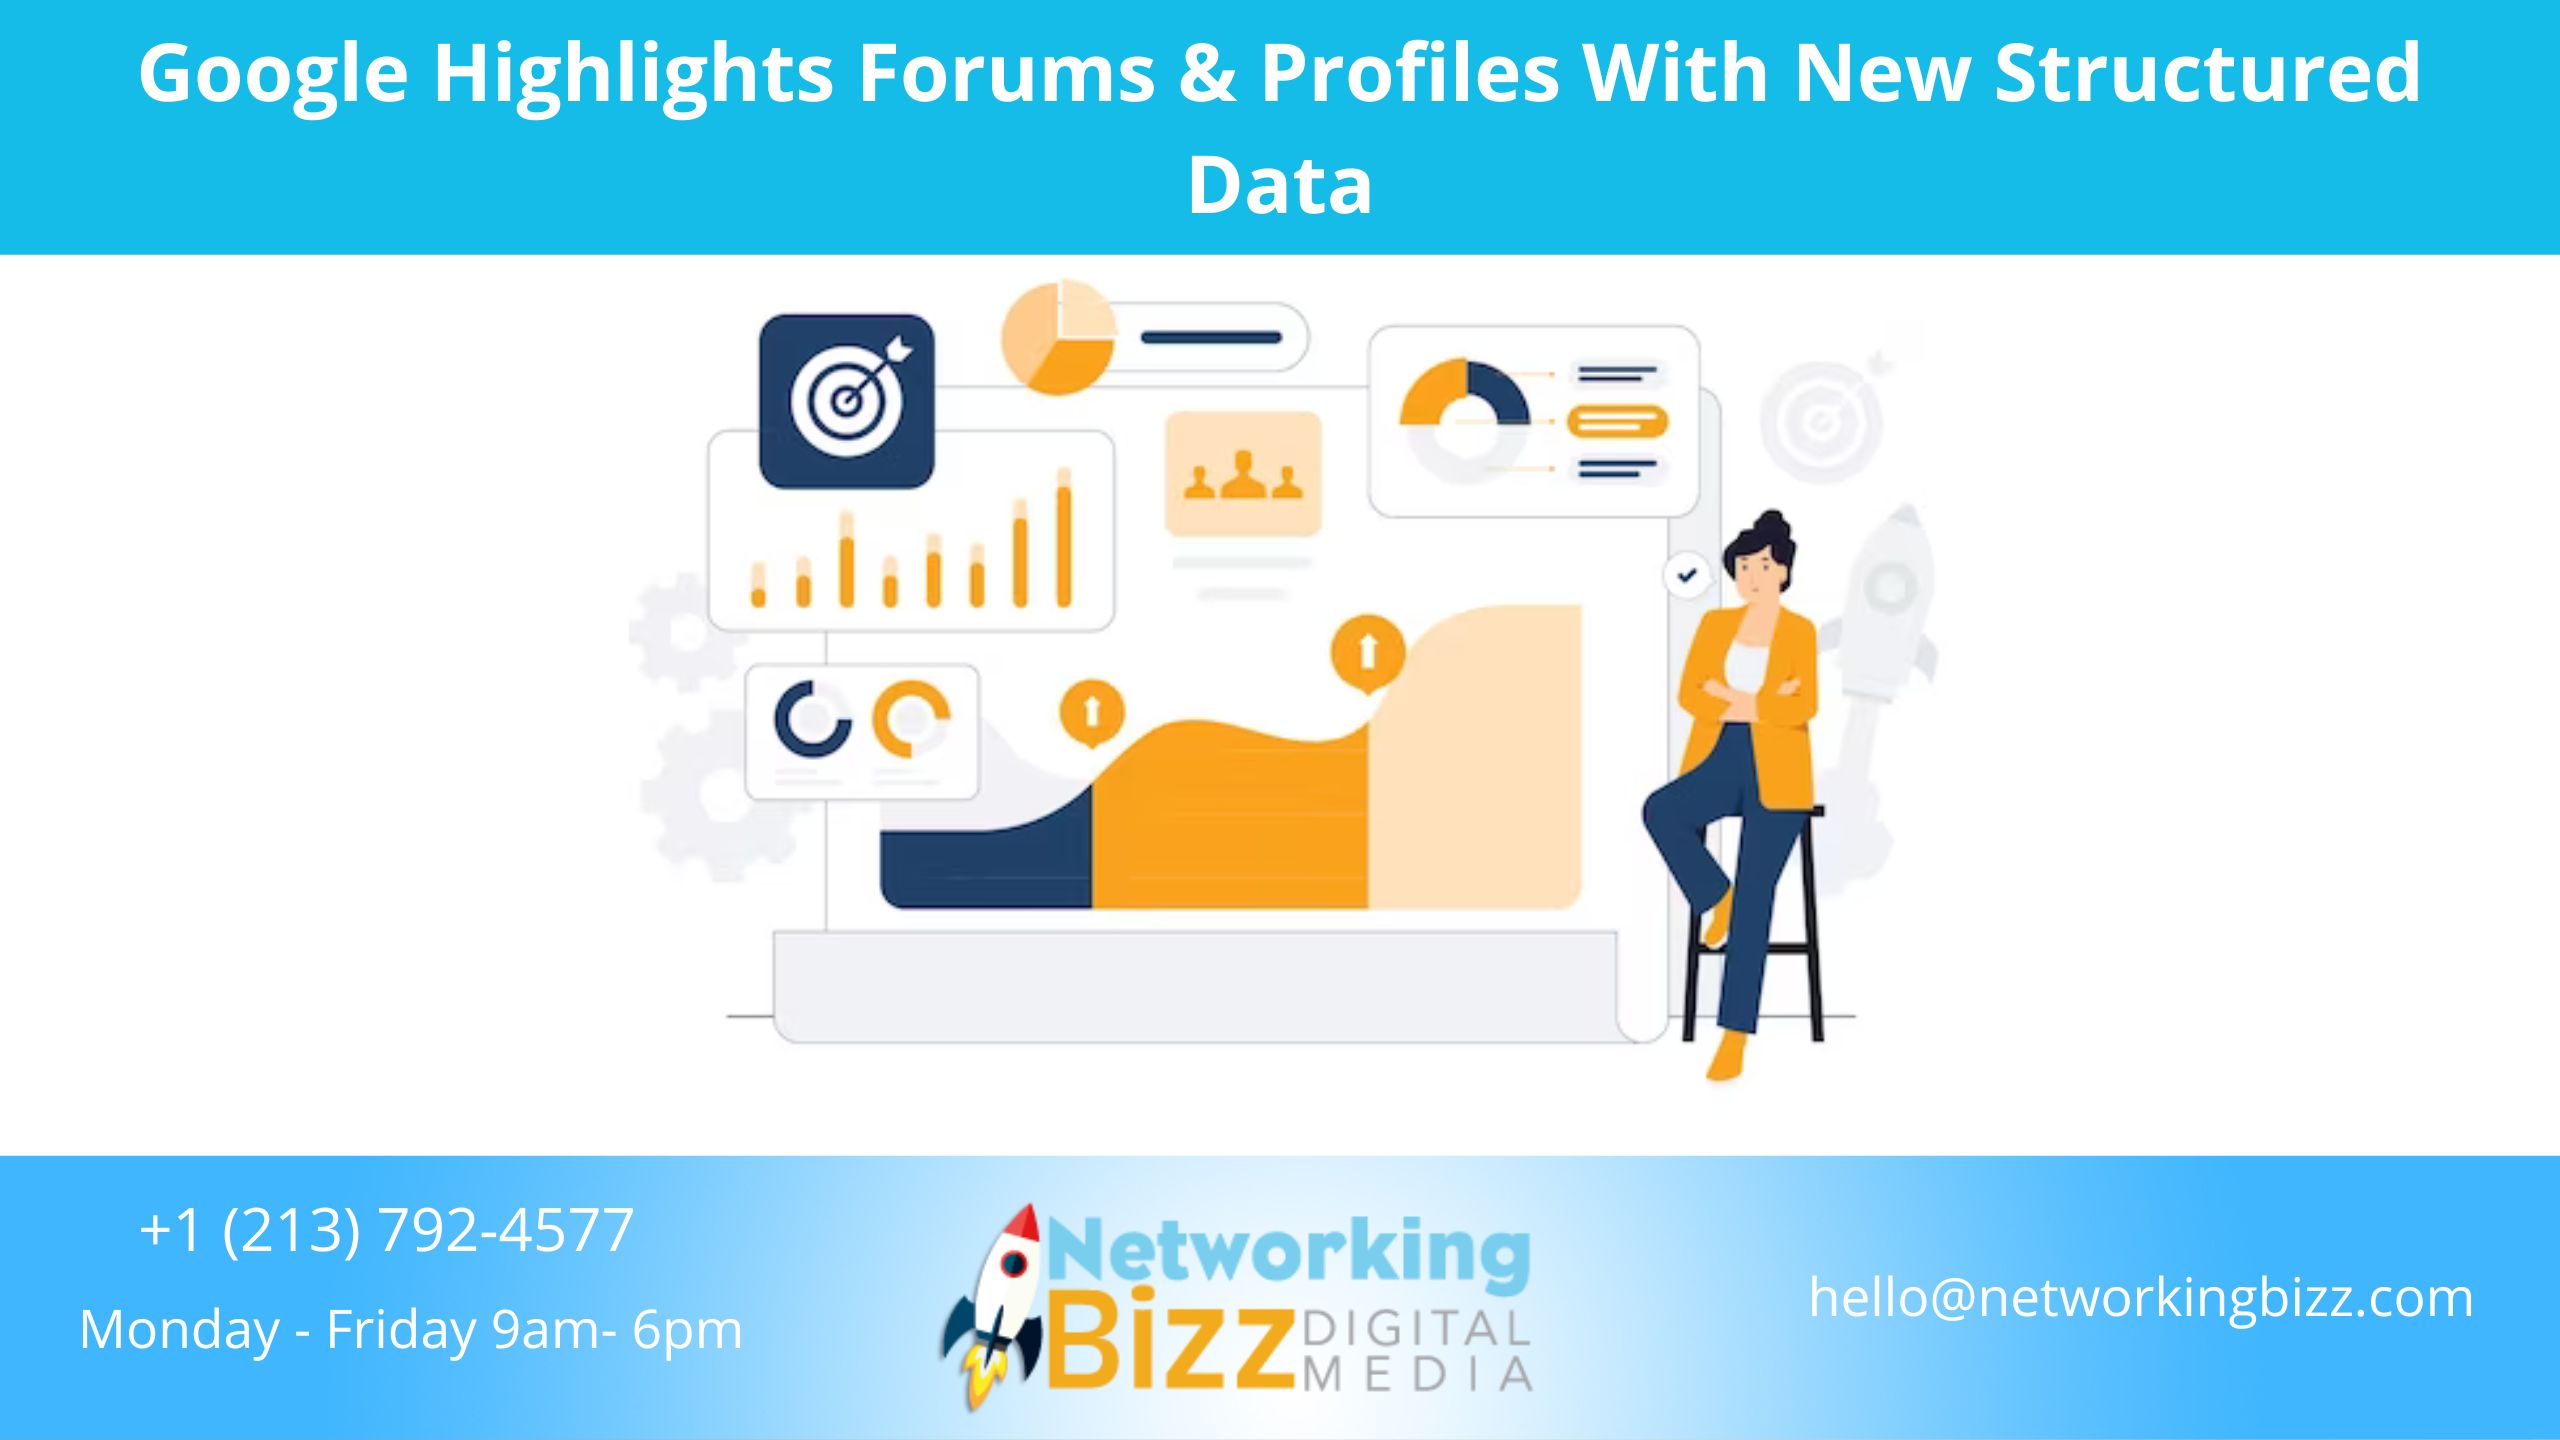 Google Highlights Forums & Profiles With New Structured Data